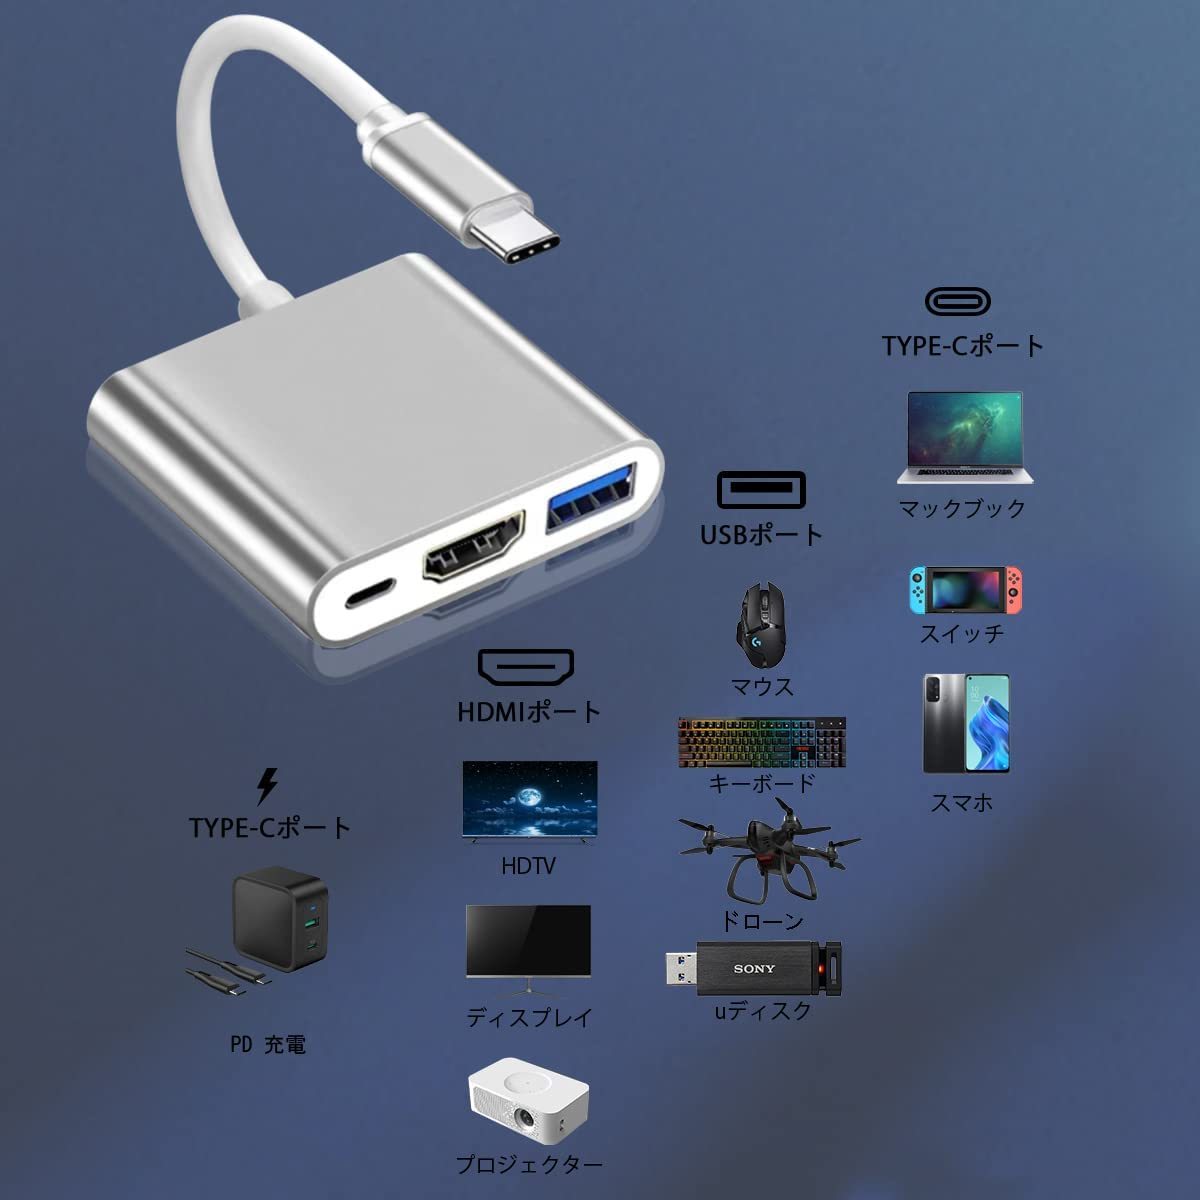 Type c HDMI conversion adaptor Type-C to HDMI conversion cable type C sudden speed charge 